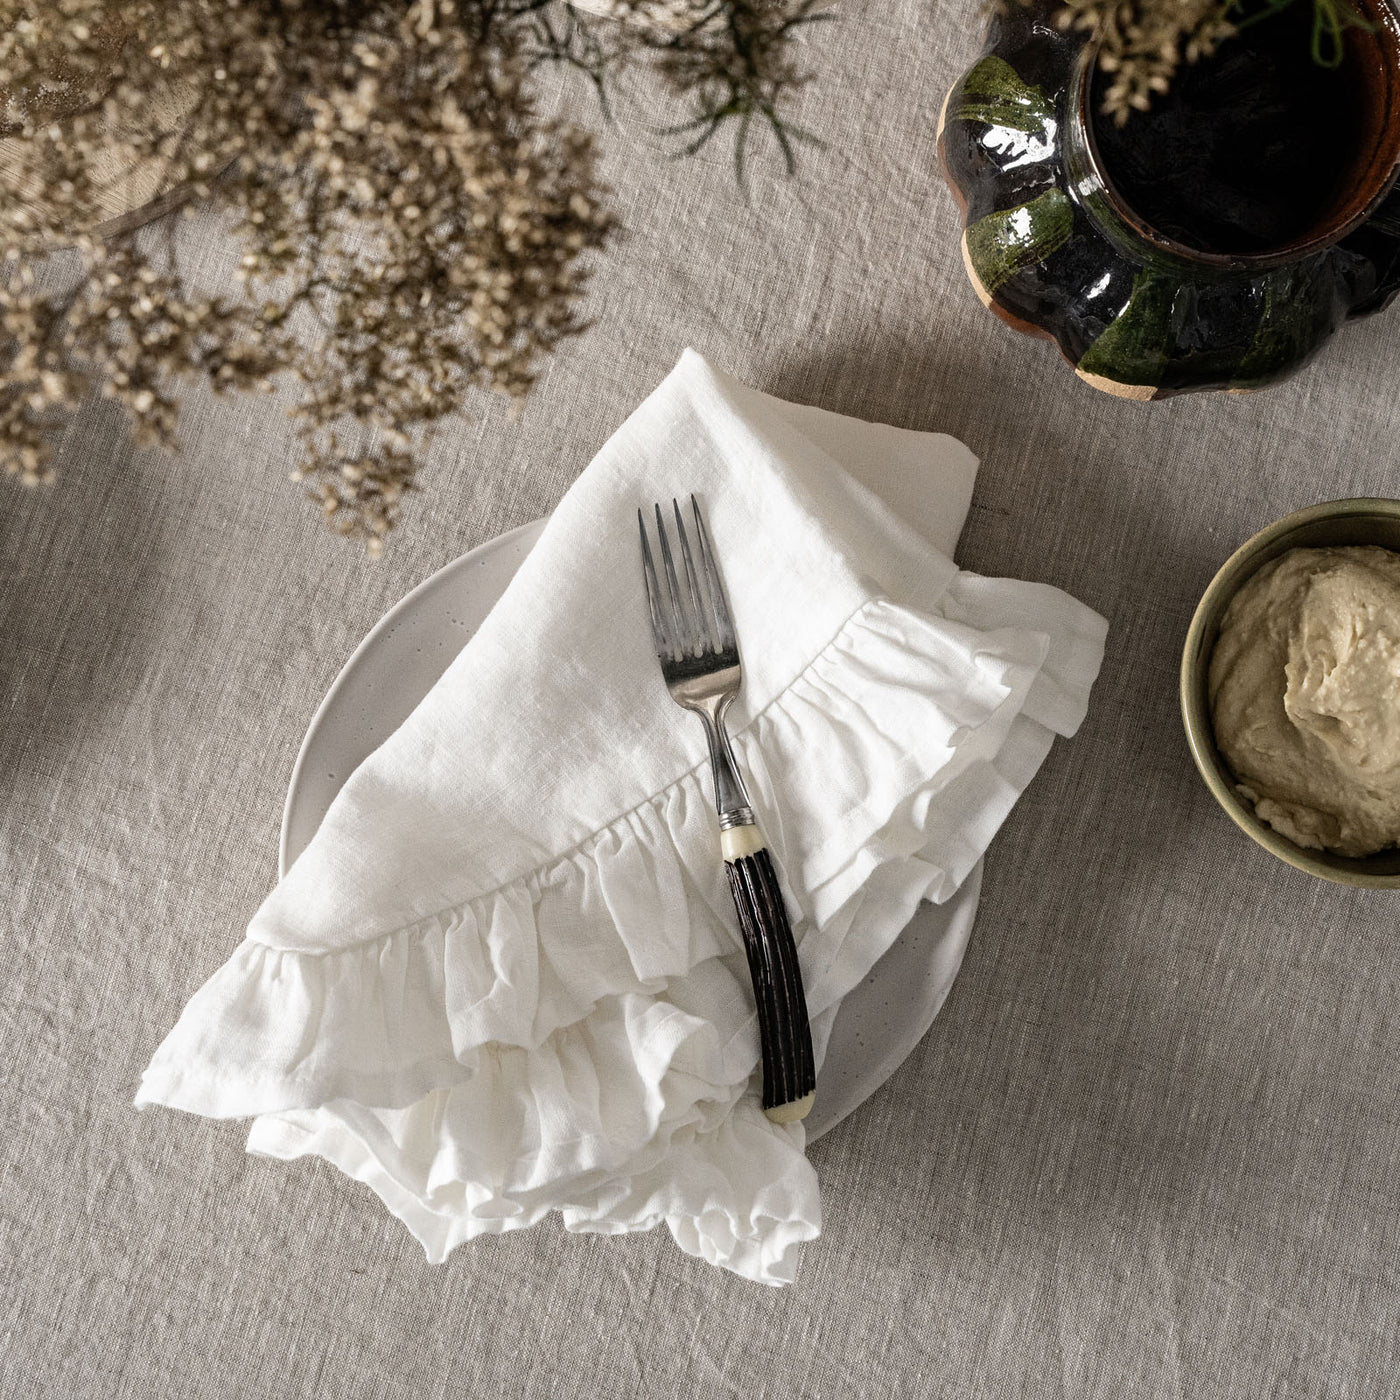 French Flax Linen Ruffles Napkins (Set Of 4) in White